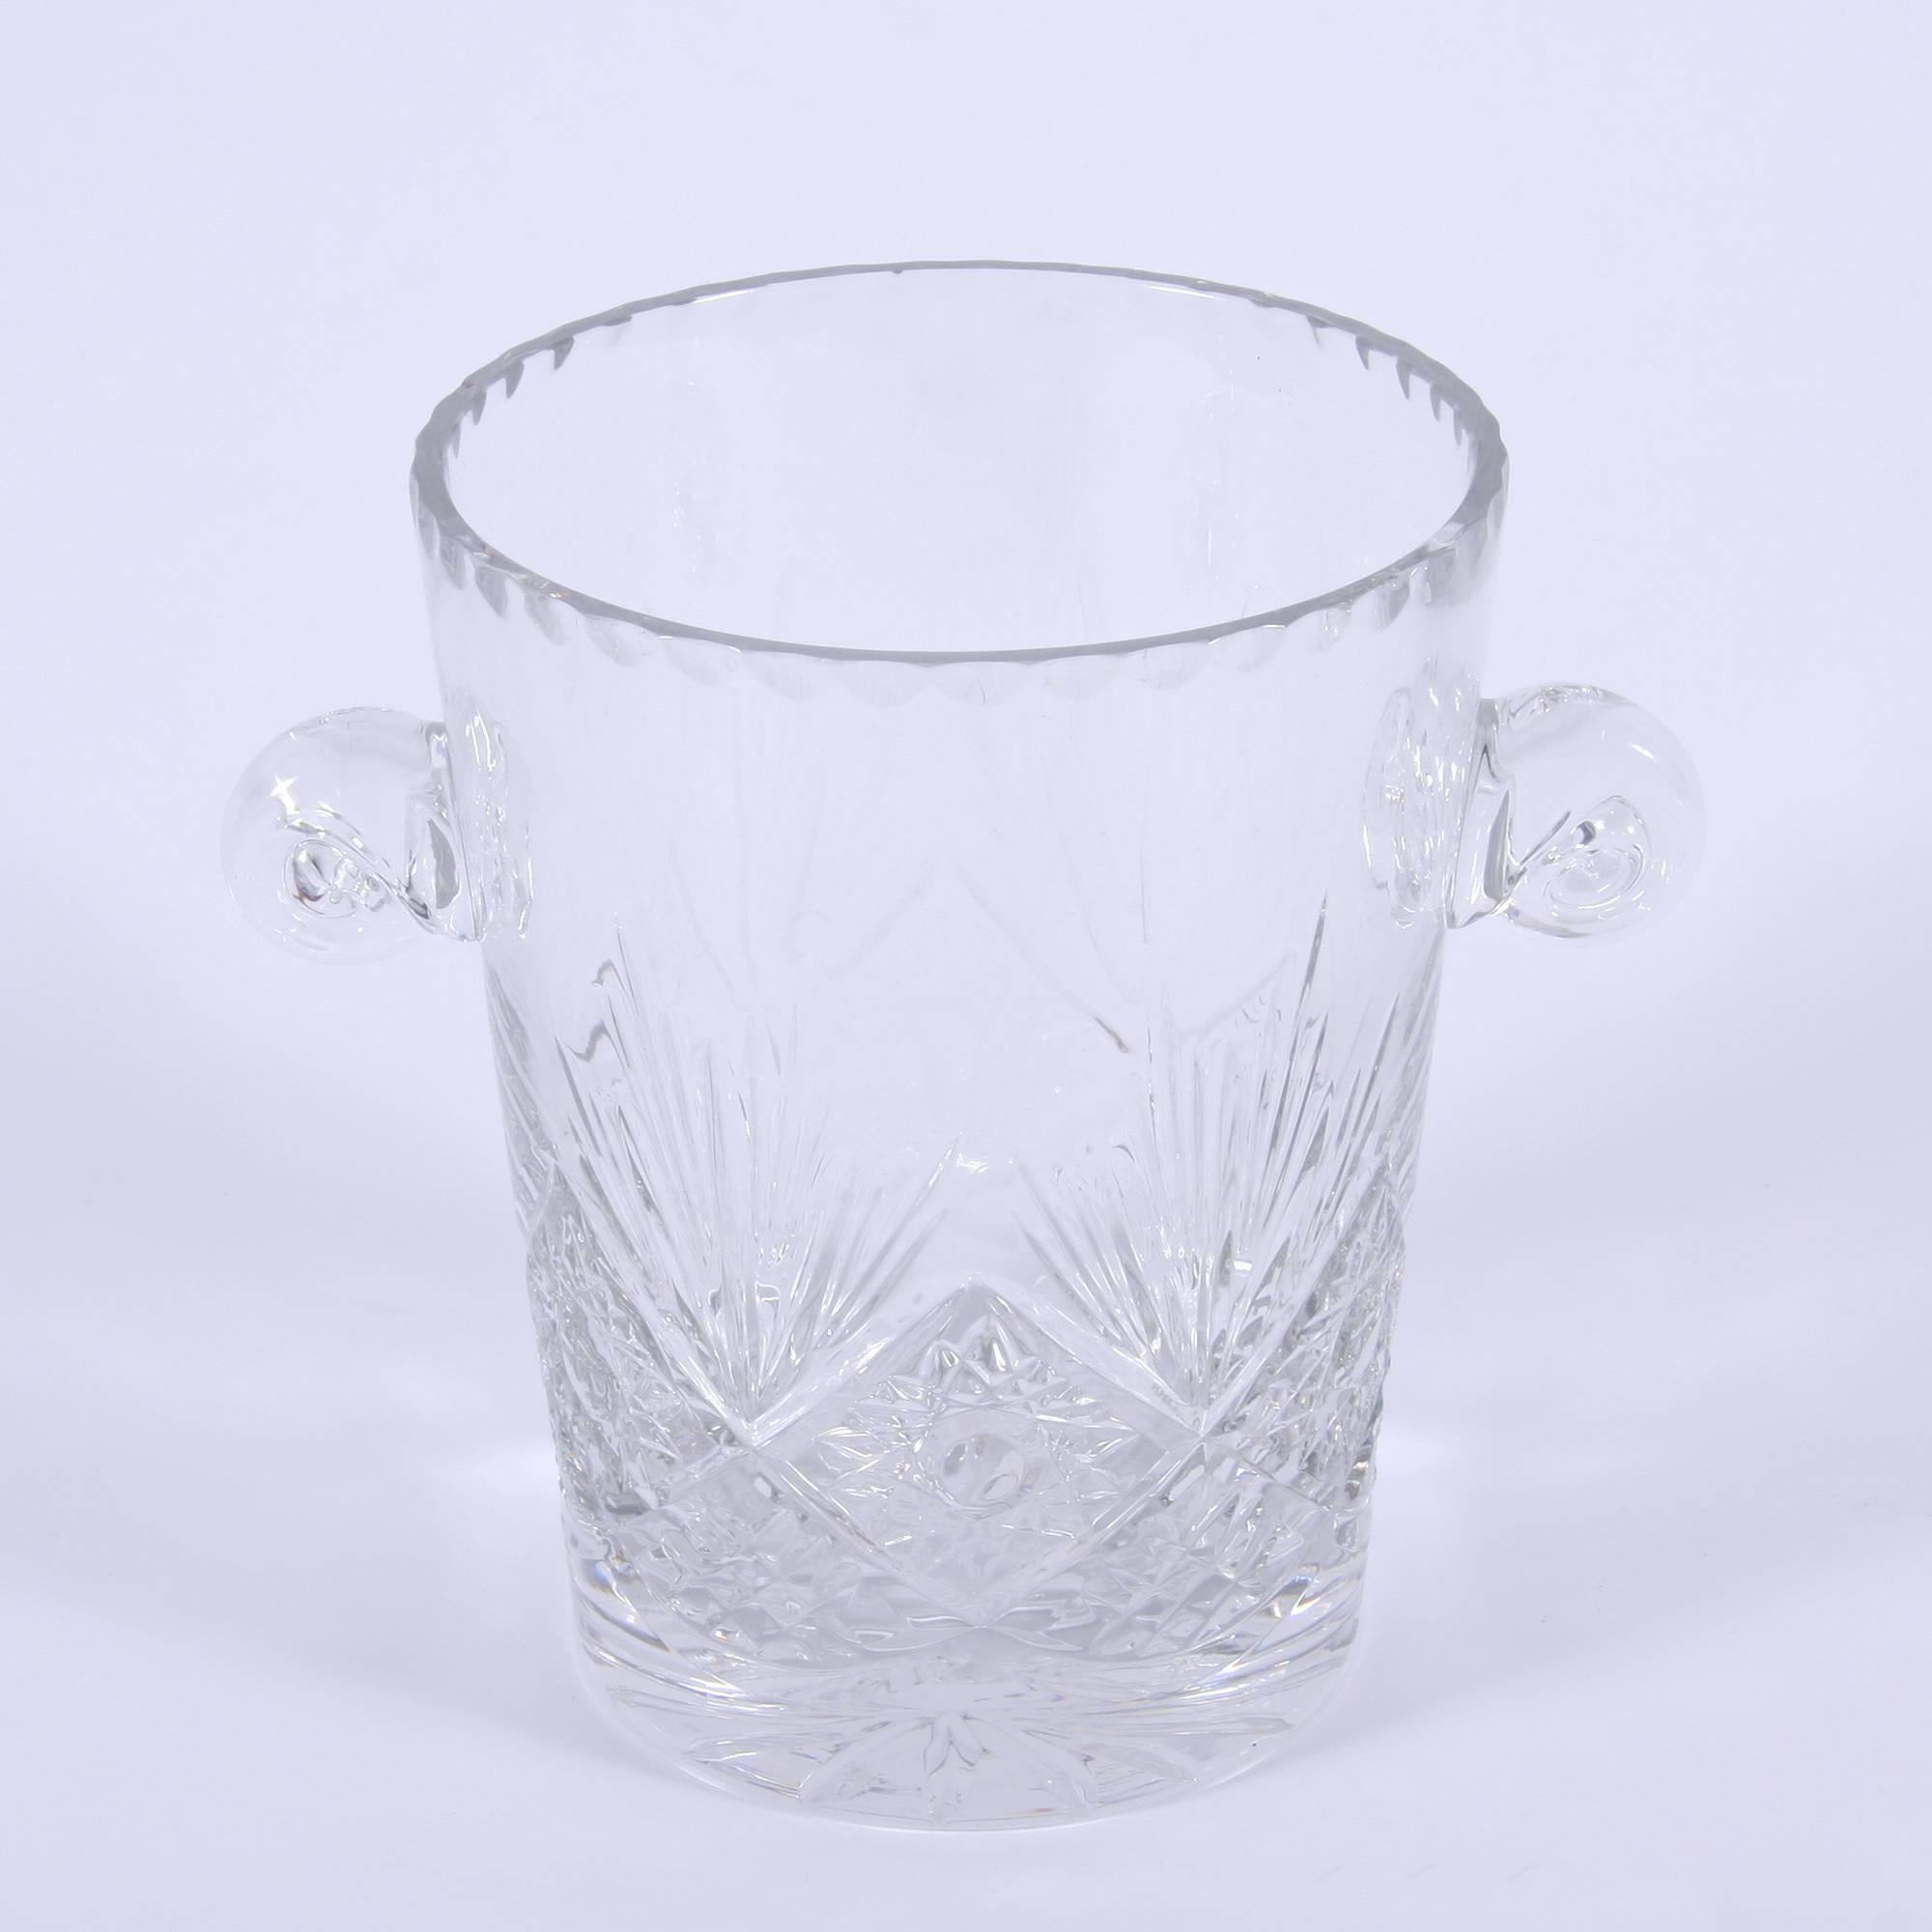 French, circa 1970

Large cut crystal ice bucket made by Baccarat, with glass handles.